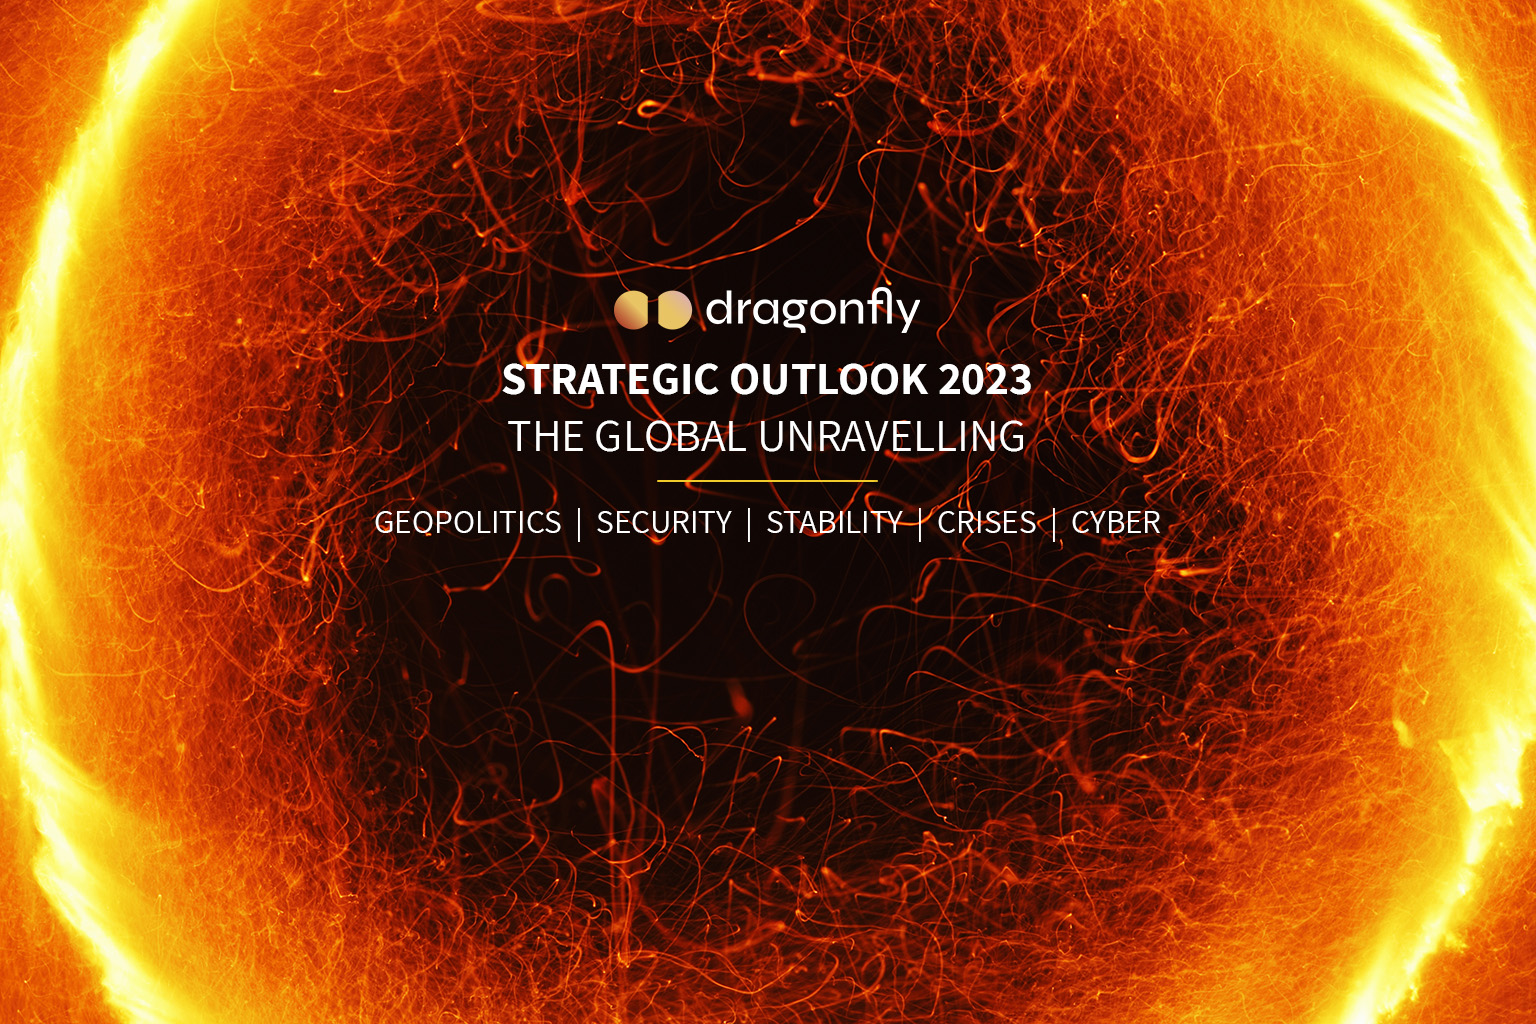 Strategic Outlook 2023 | The Global Unravelling